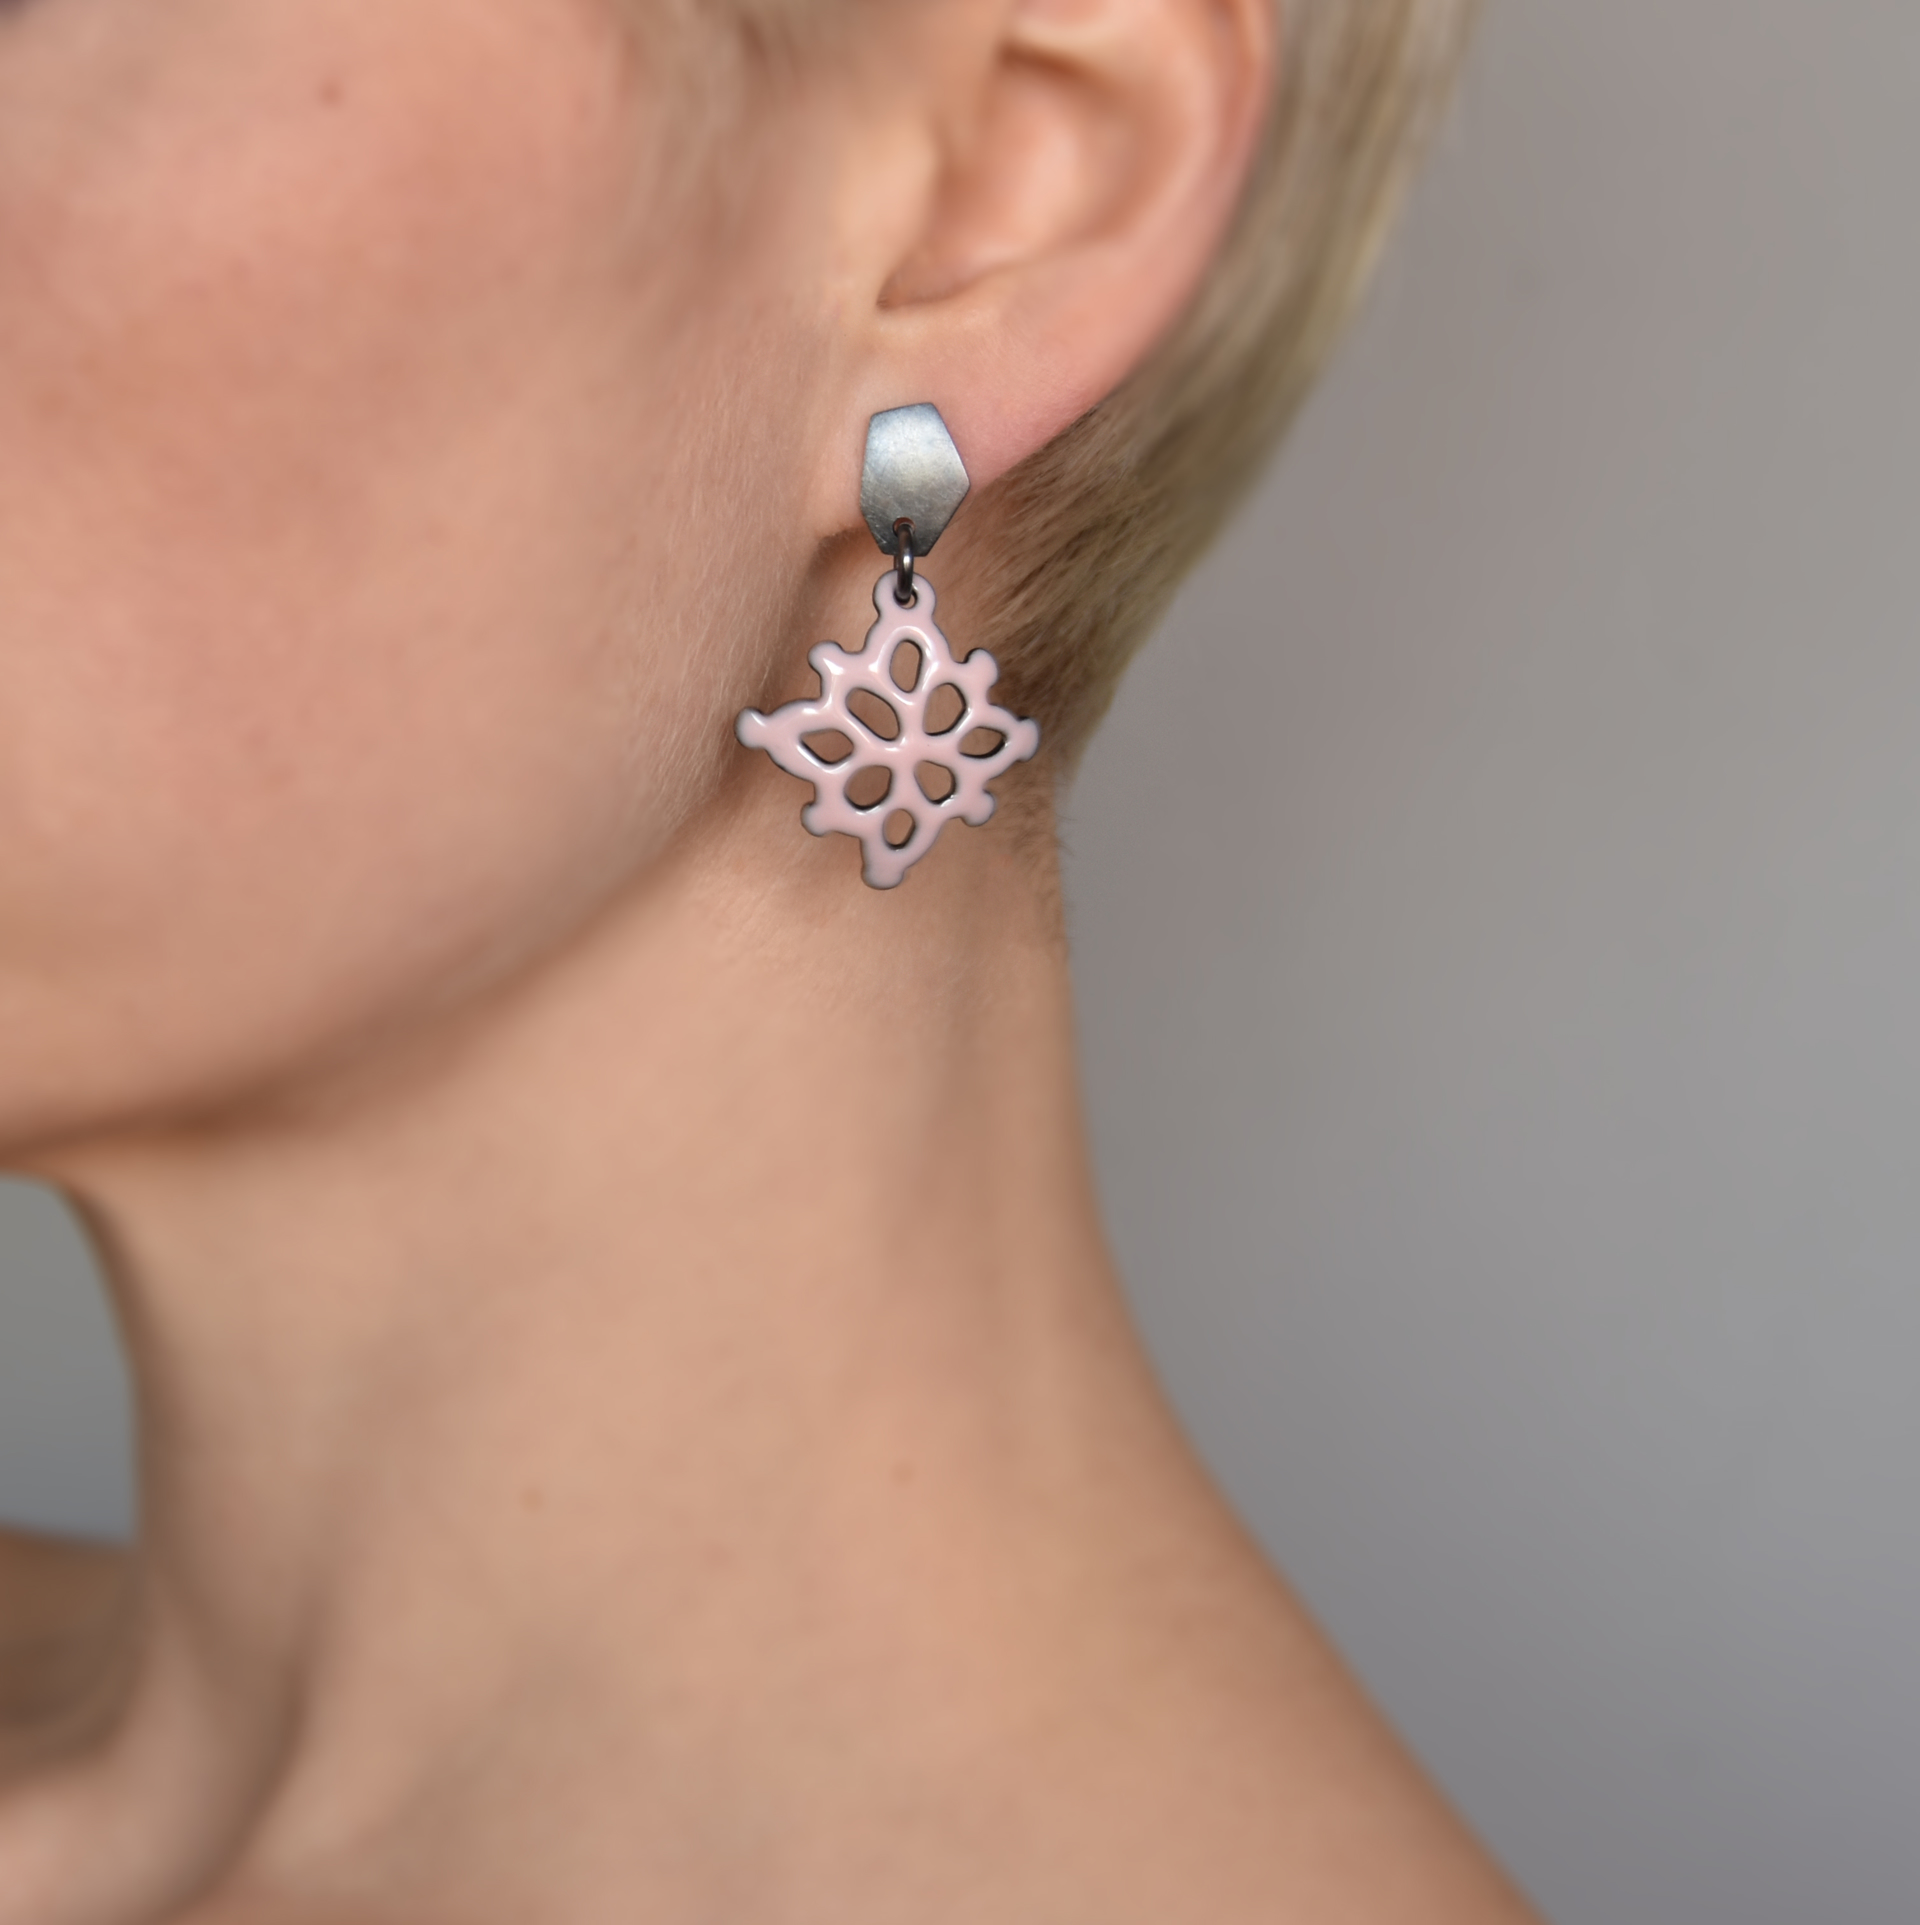 Square Structure Earrings by Joanna Nealey